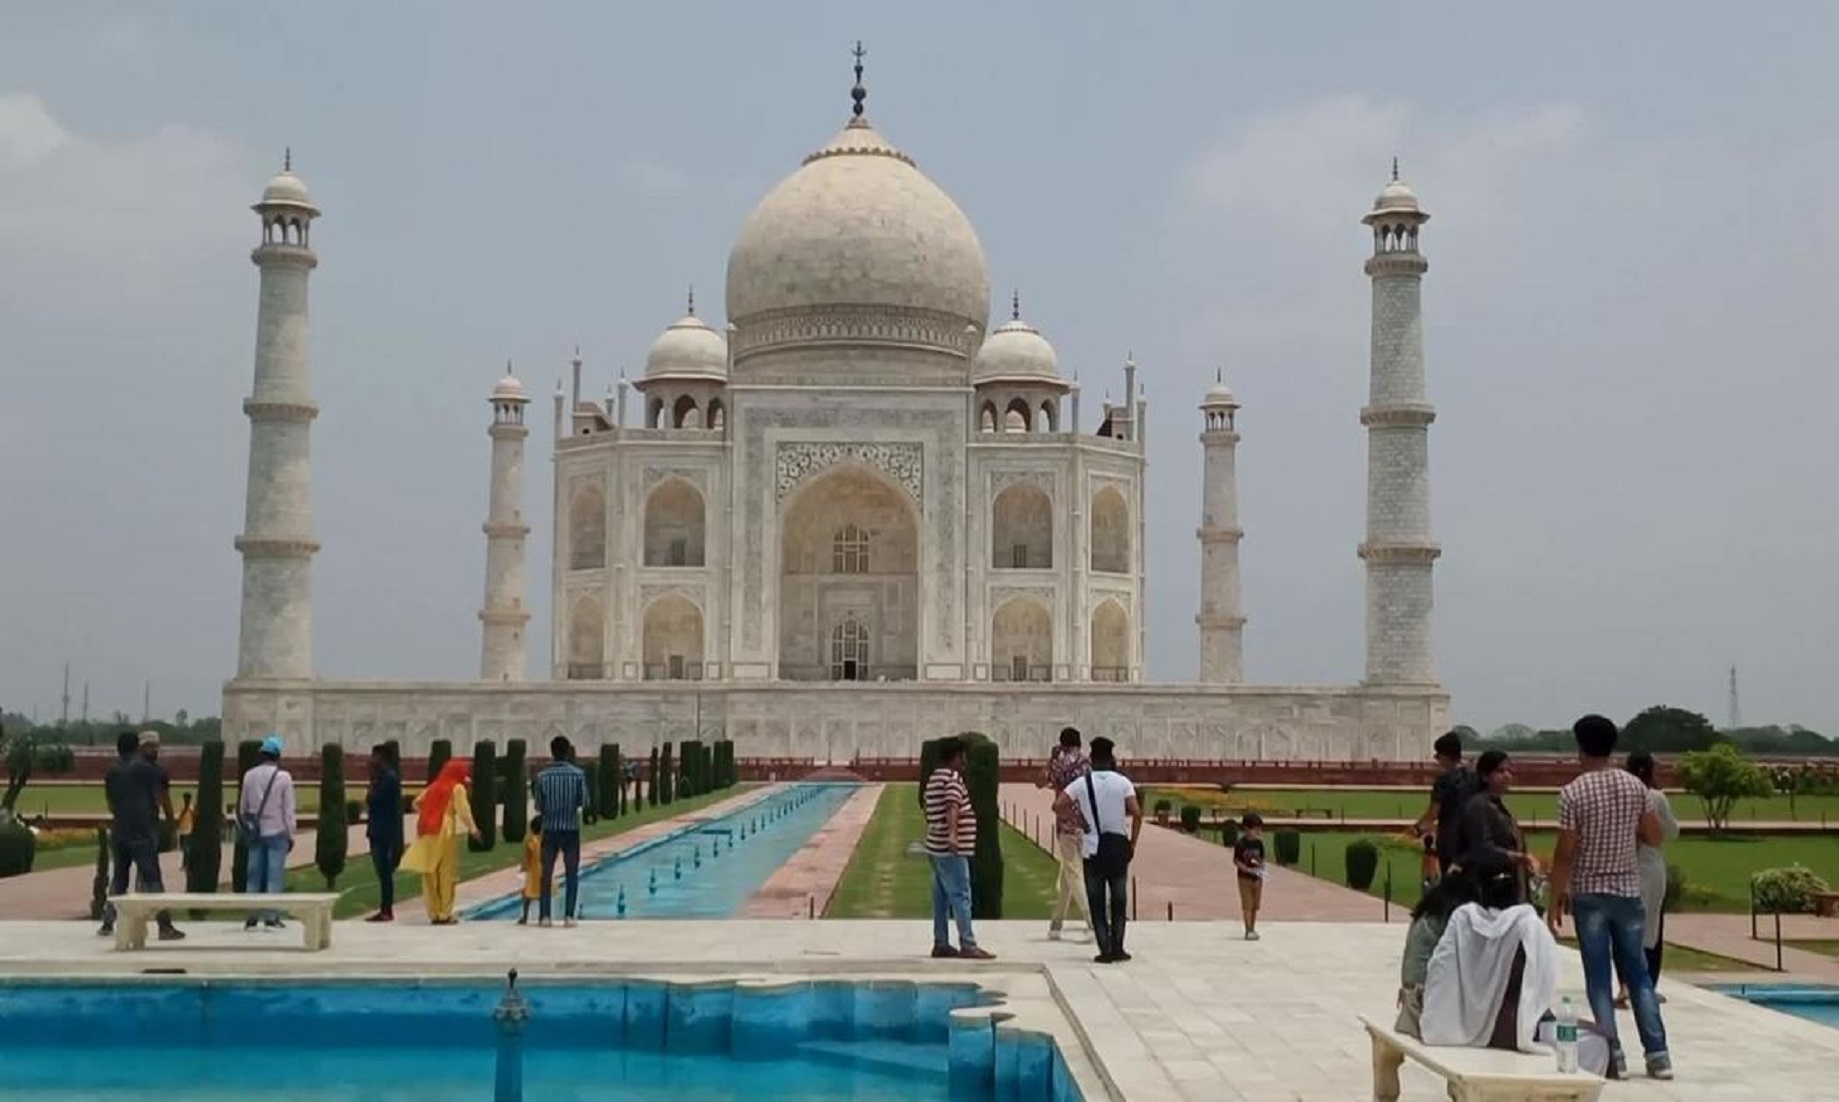 Roundup: India’s Iconic Taj Mahal Reopens After Two-Month Closure